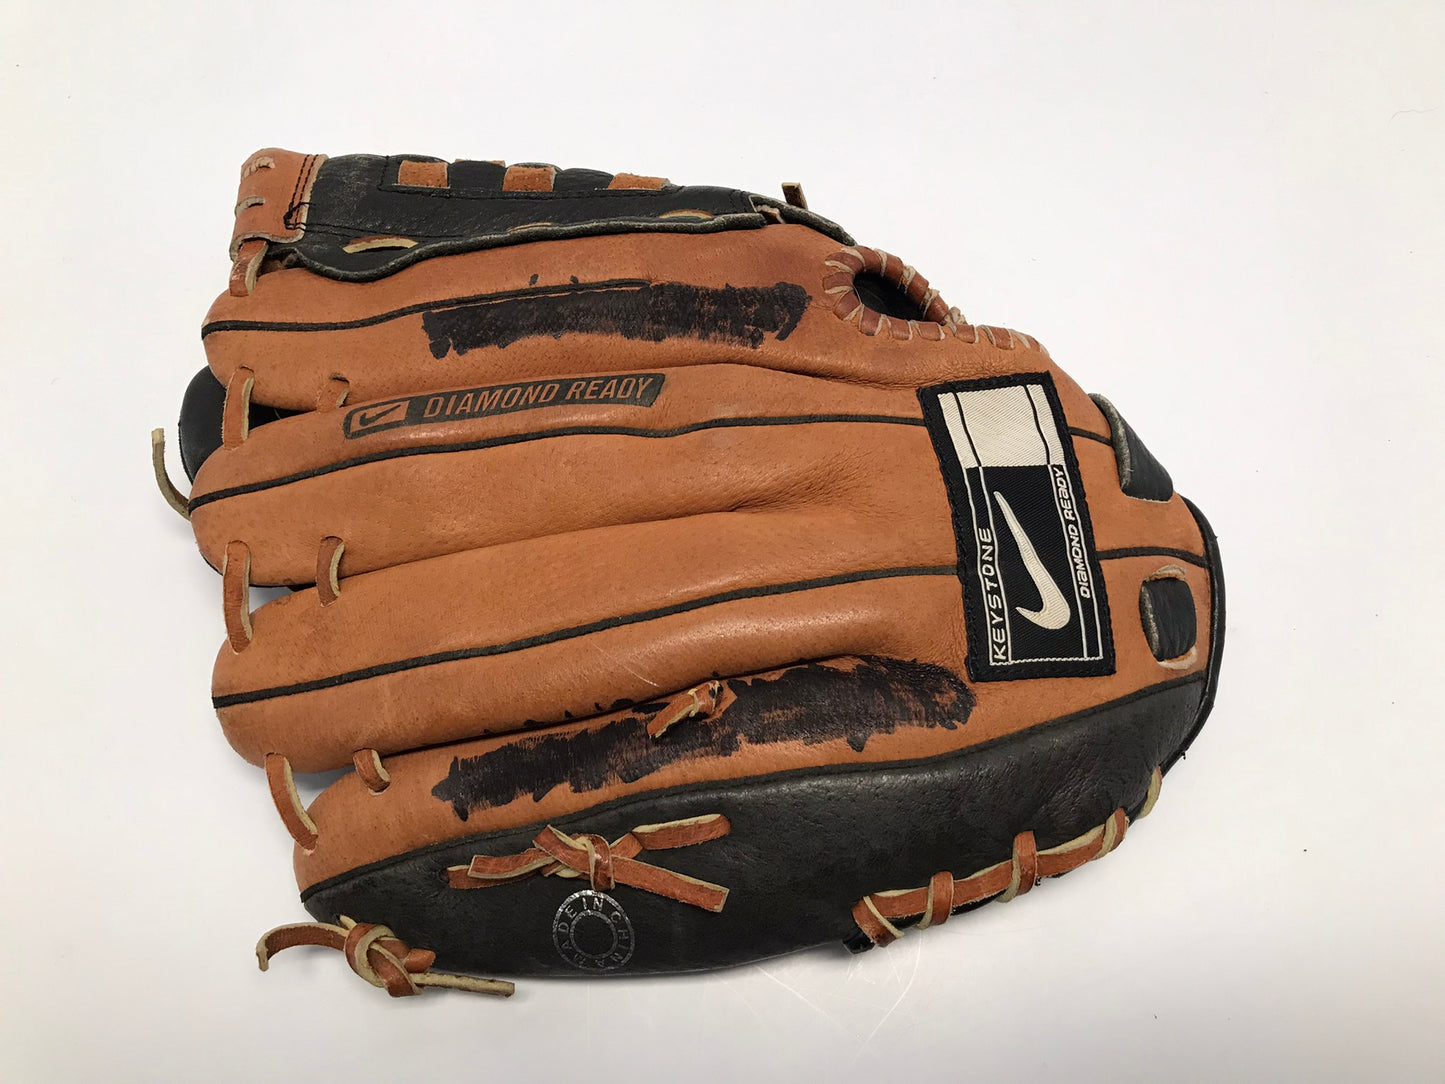 Baseball Glove Adult Size 12 inch Nike Diamond Black Brown  Leather Fits on Left Hand Excellent